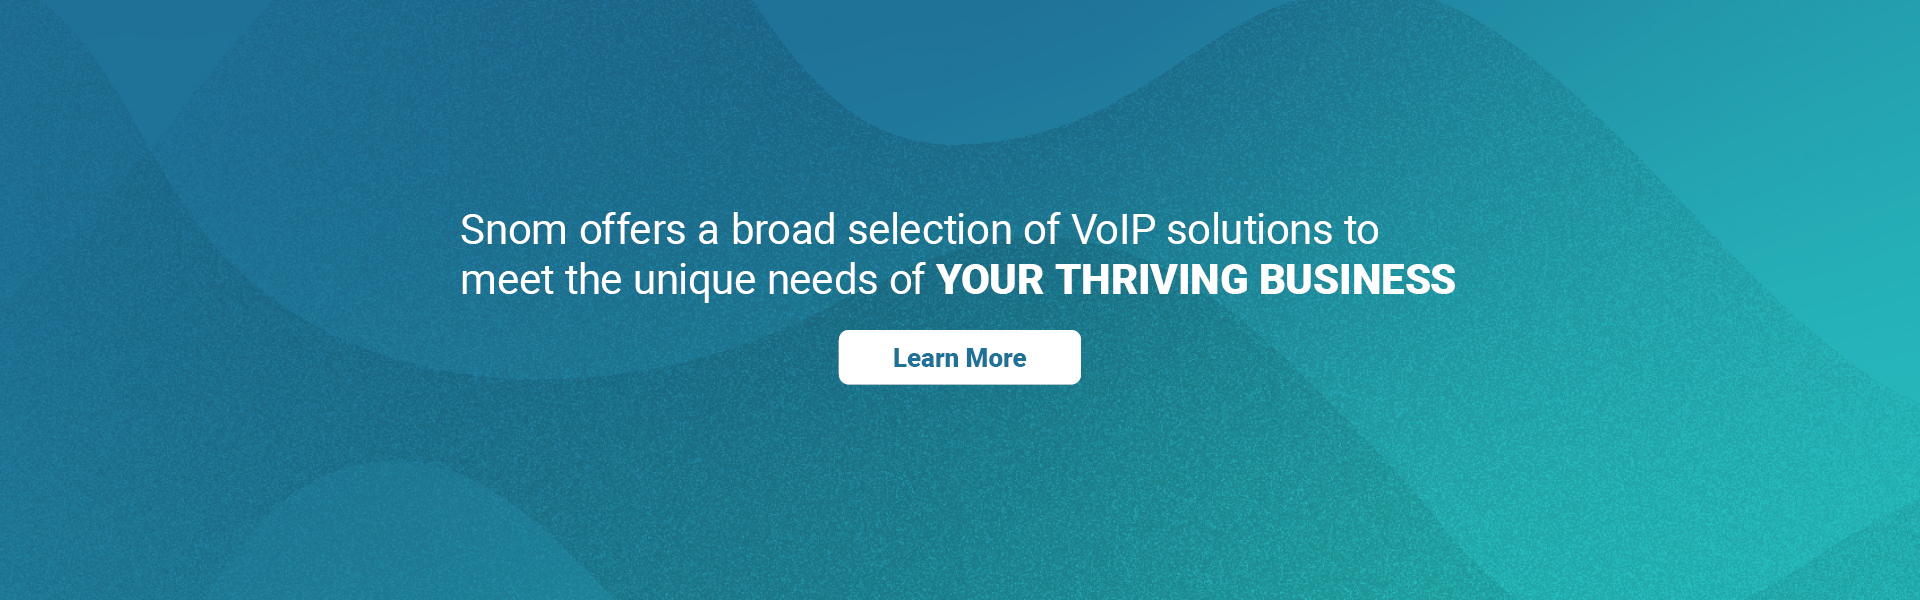 Snom offers a broad selection of VoIP solutions to meet the unique needs of YOUR THRIVING BUSINESS | LEARN MORE